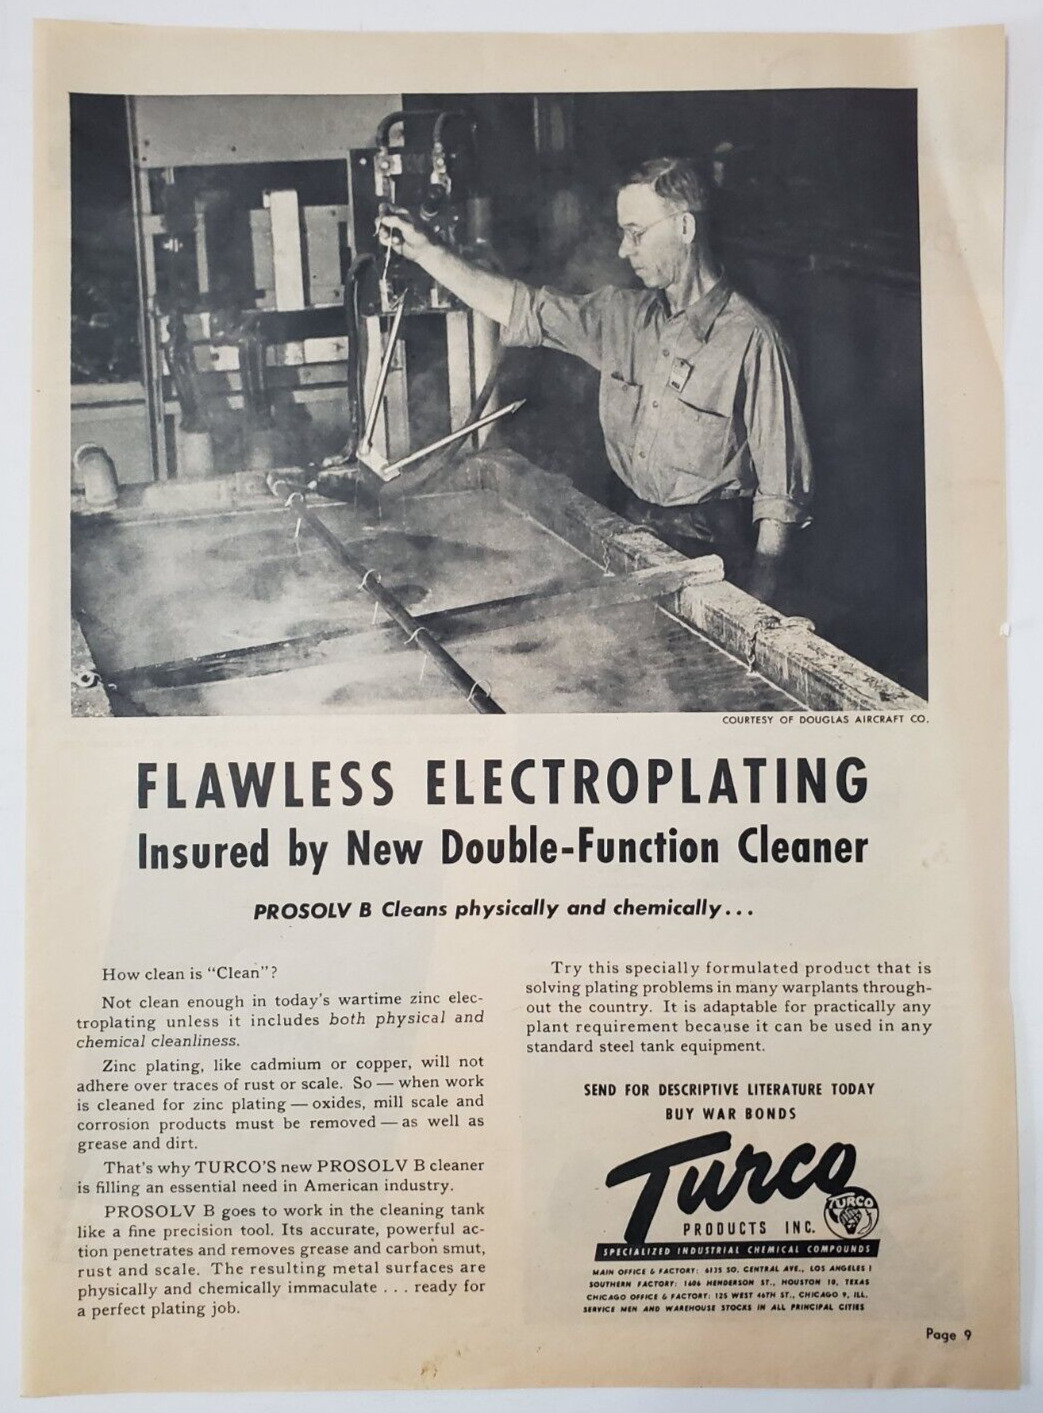 1944 Turco Manufacturing Inc Vintage WWII Print Ad Flawless Electroplating